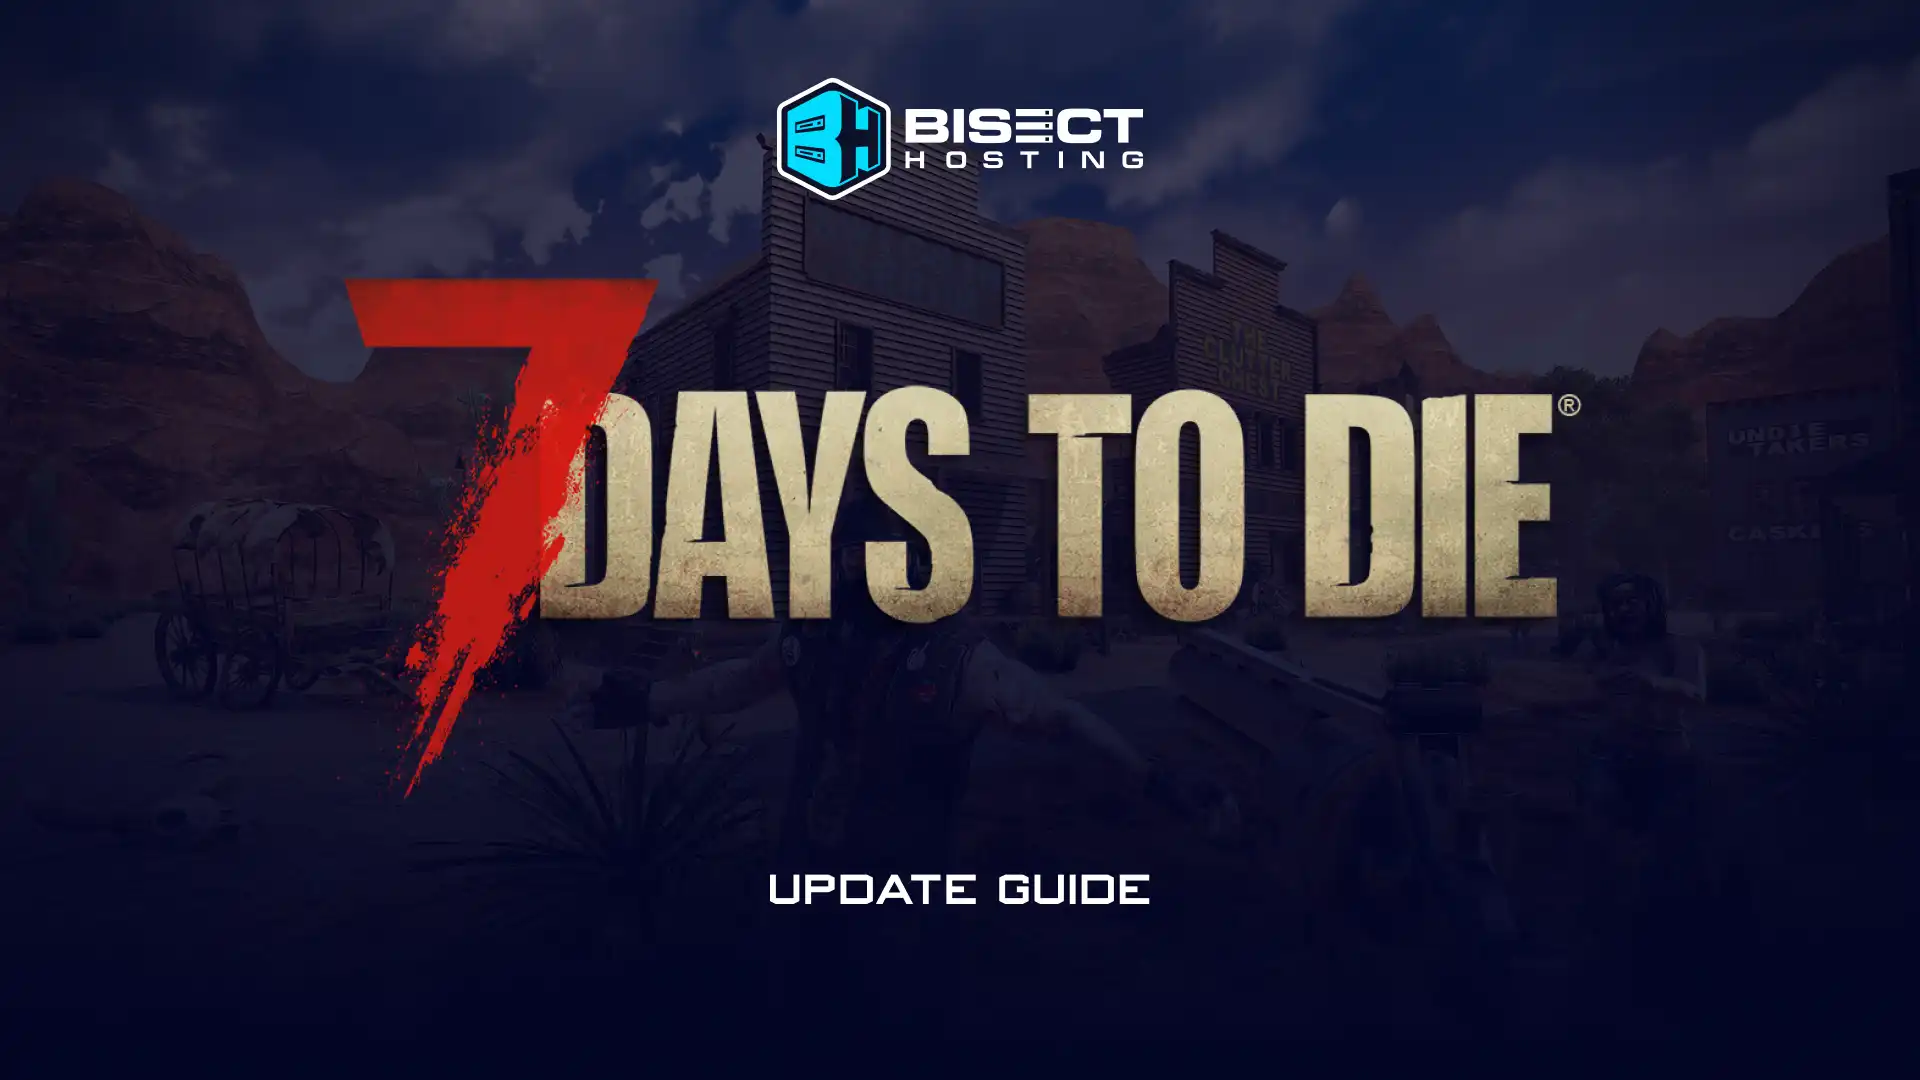 7 Days to Die 1.0 Release Date, New Features, & More